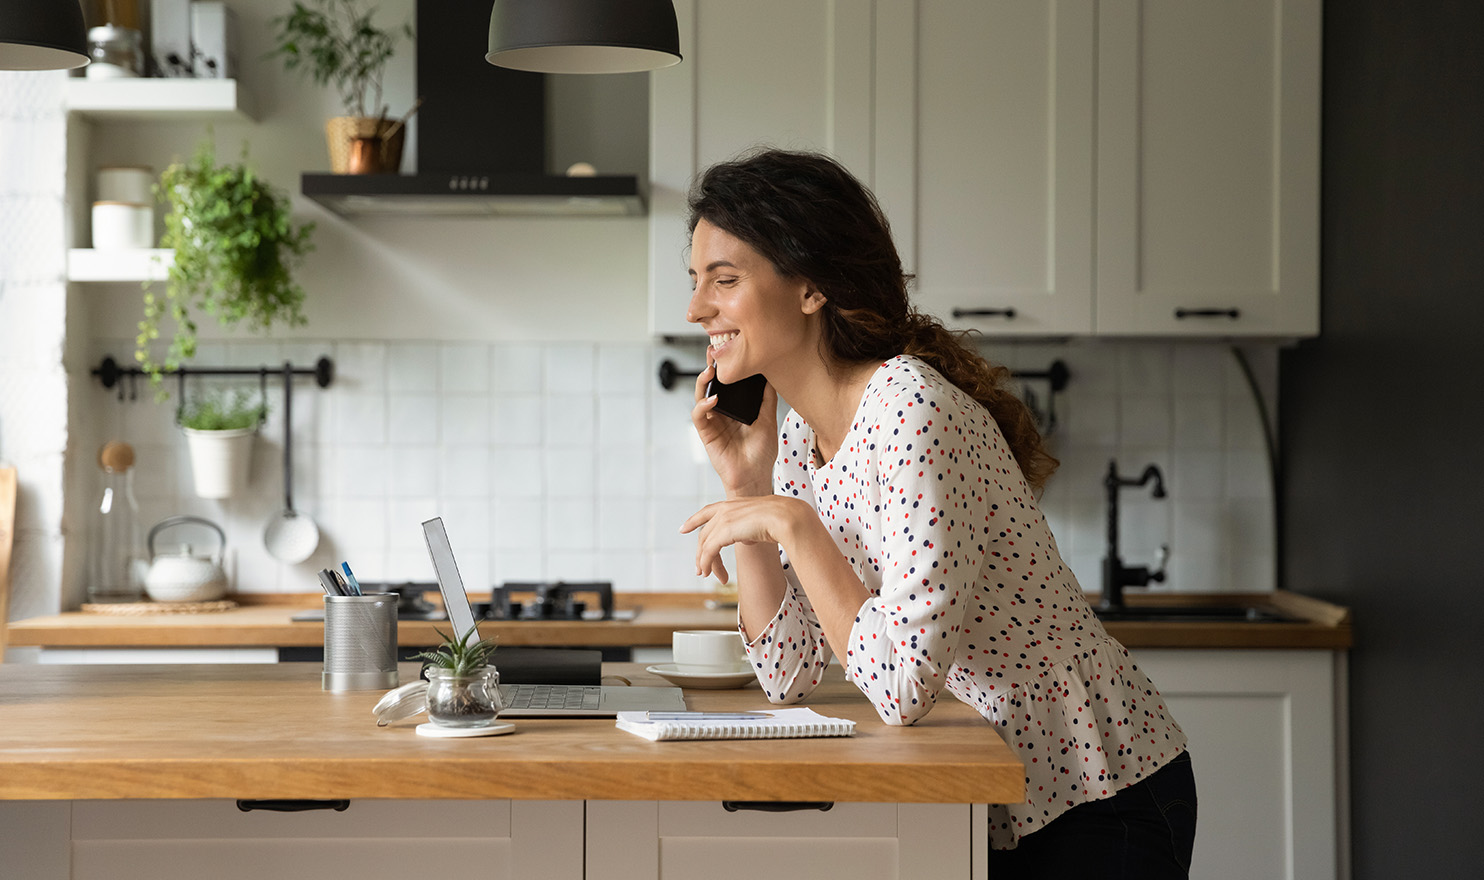 A young woman is leaning against her kitchen counter as she smiles while talking on the phone and working on her laptop after filing a claim with her insurance company.